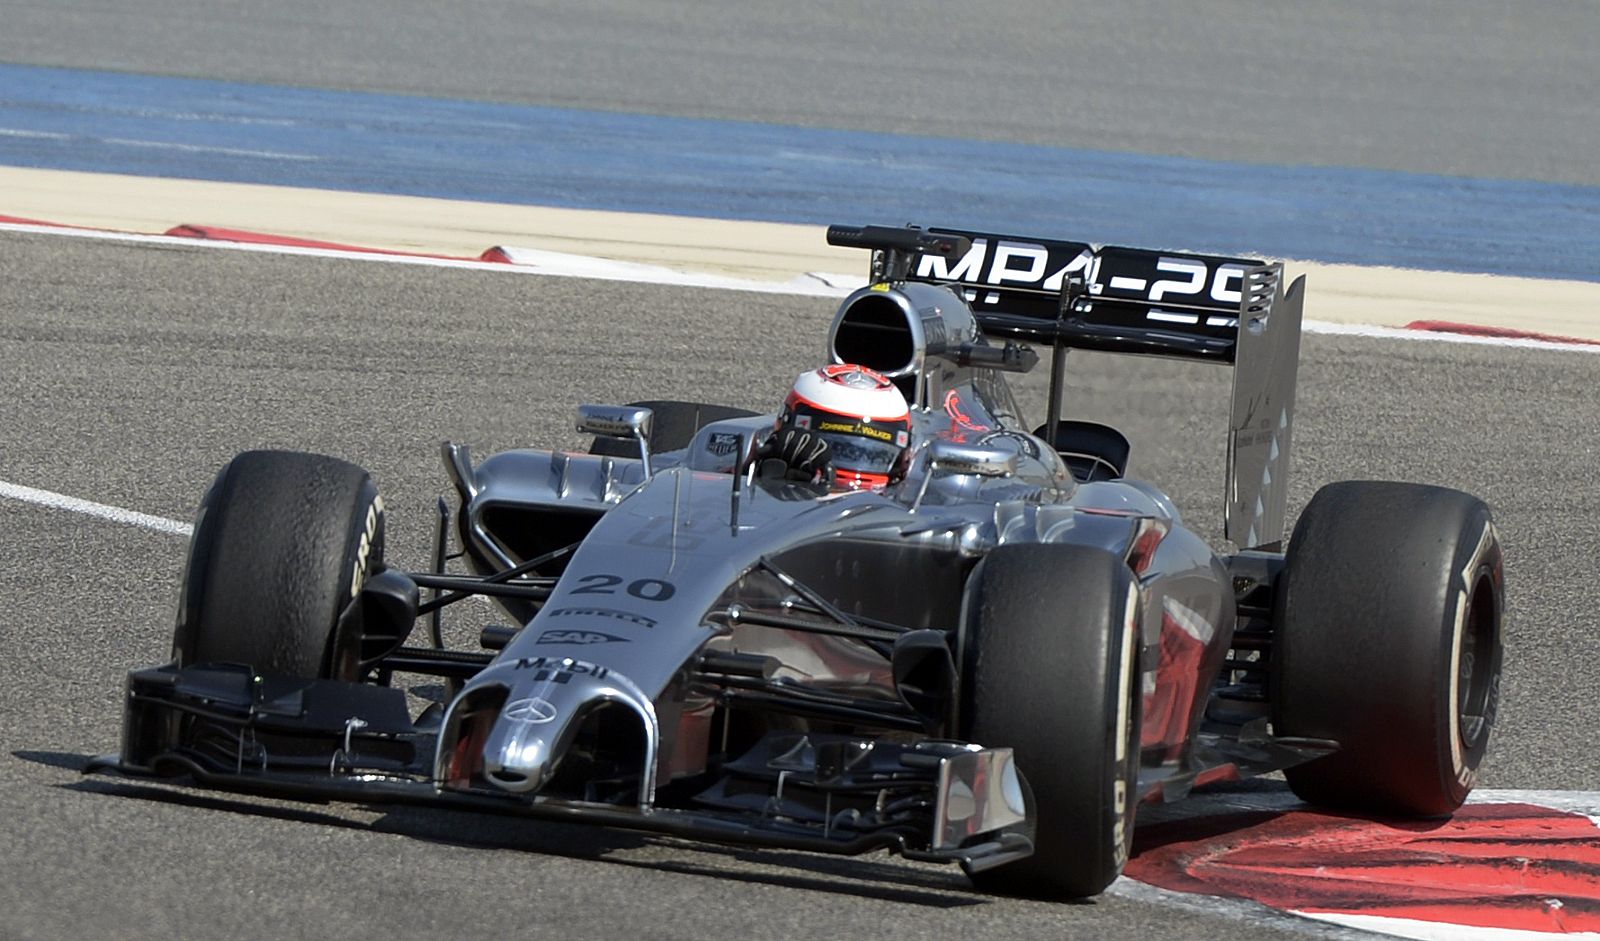 McLaren F1 driver Kevin Magnussen of Denmark drives during the first day of Formula One testing in Bahrain International Circuit in Sakhir